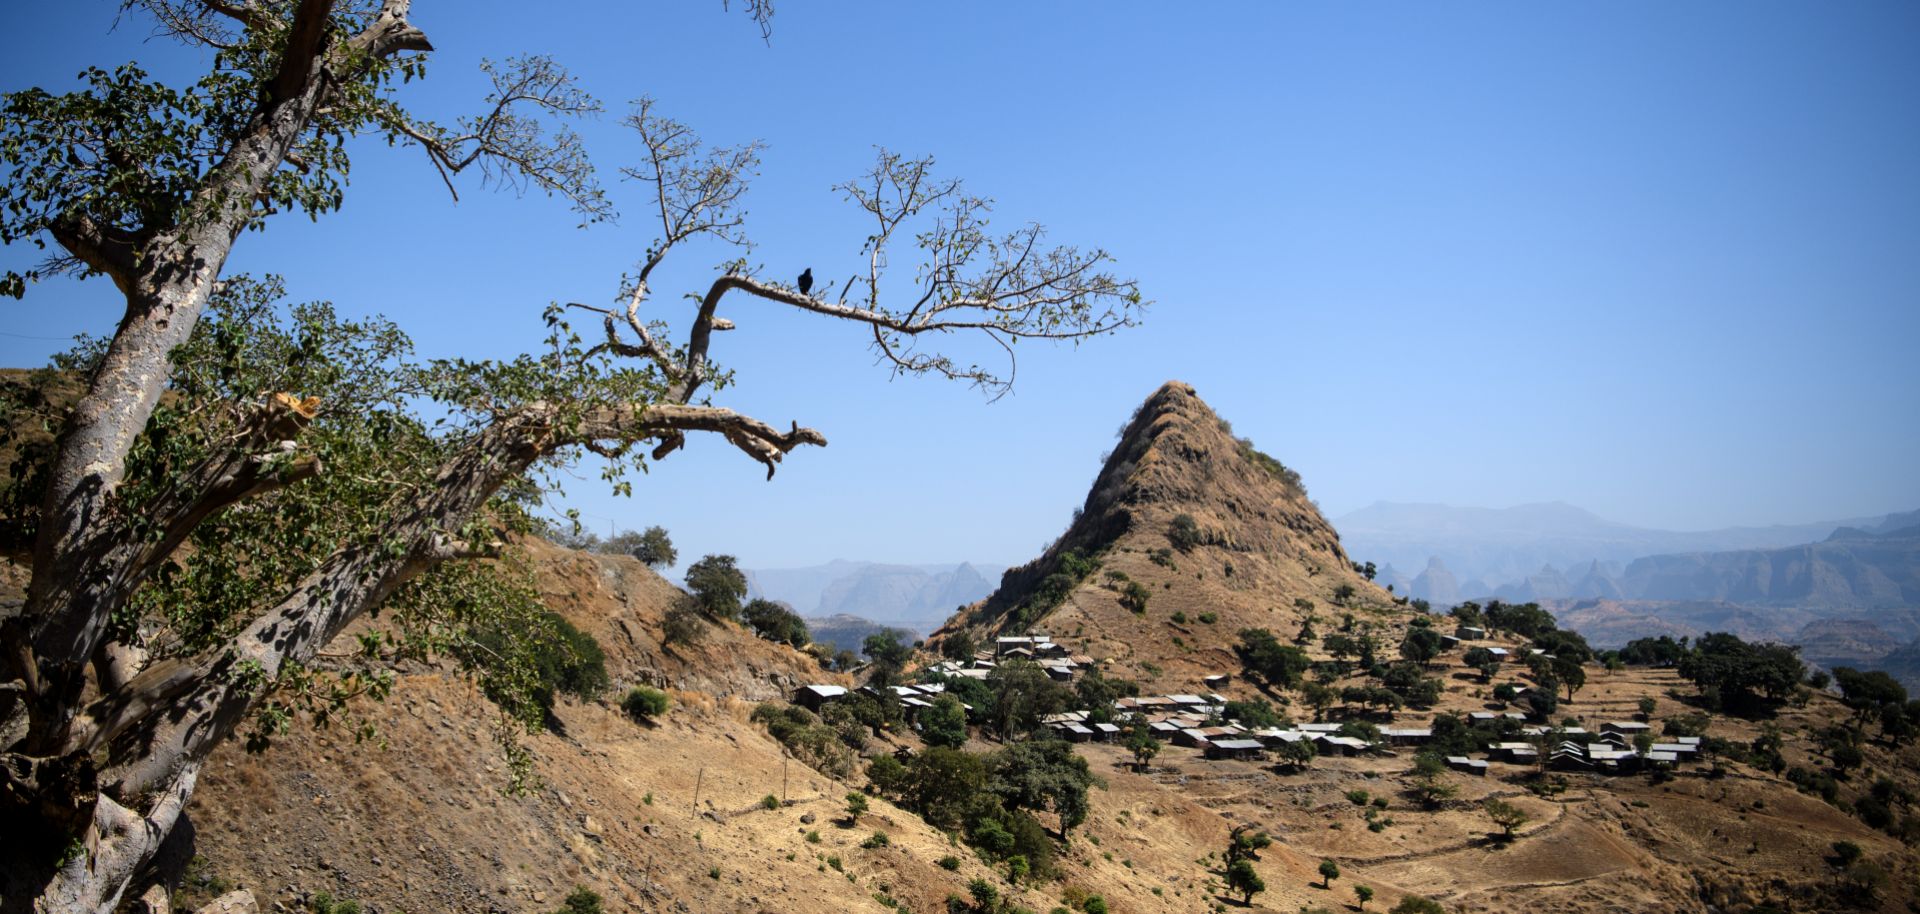 A photograph shows a village below a prominent hill in the Semien Mountains near Gondar, Ethiopia.